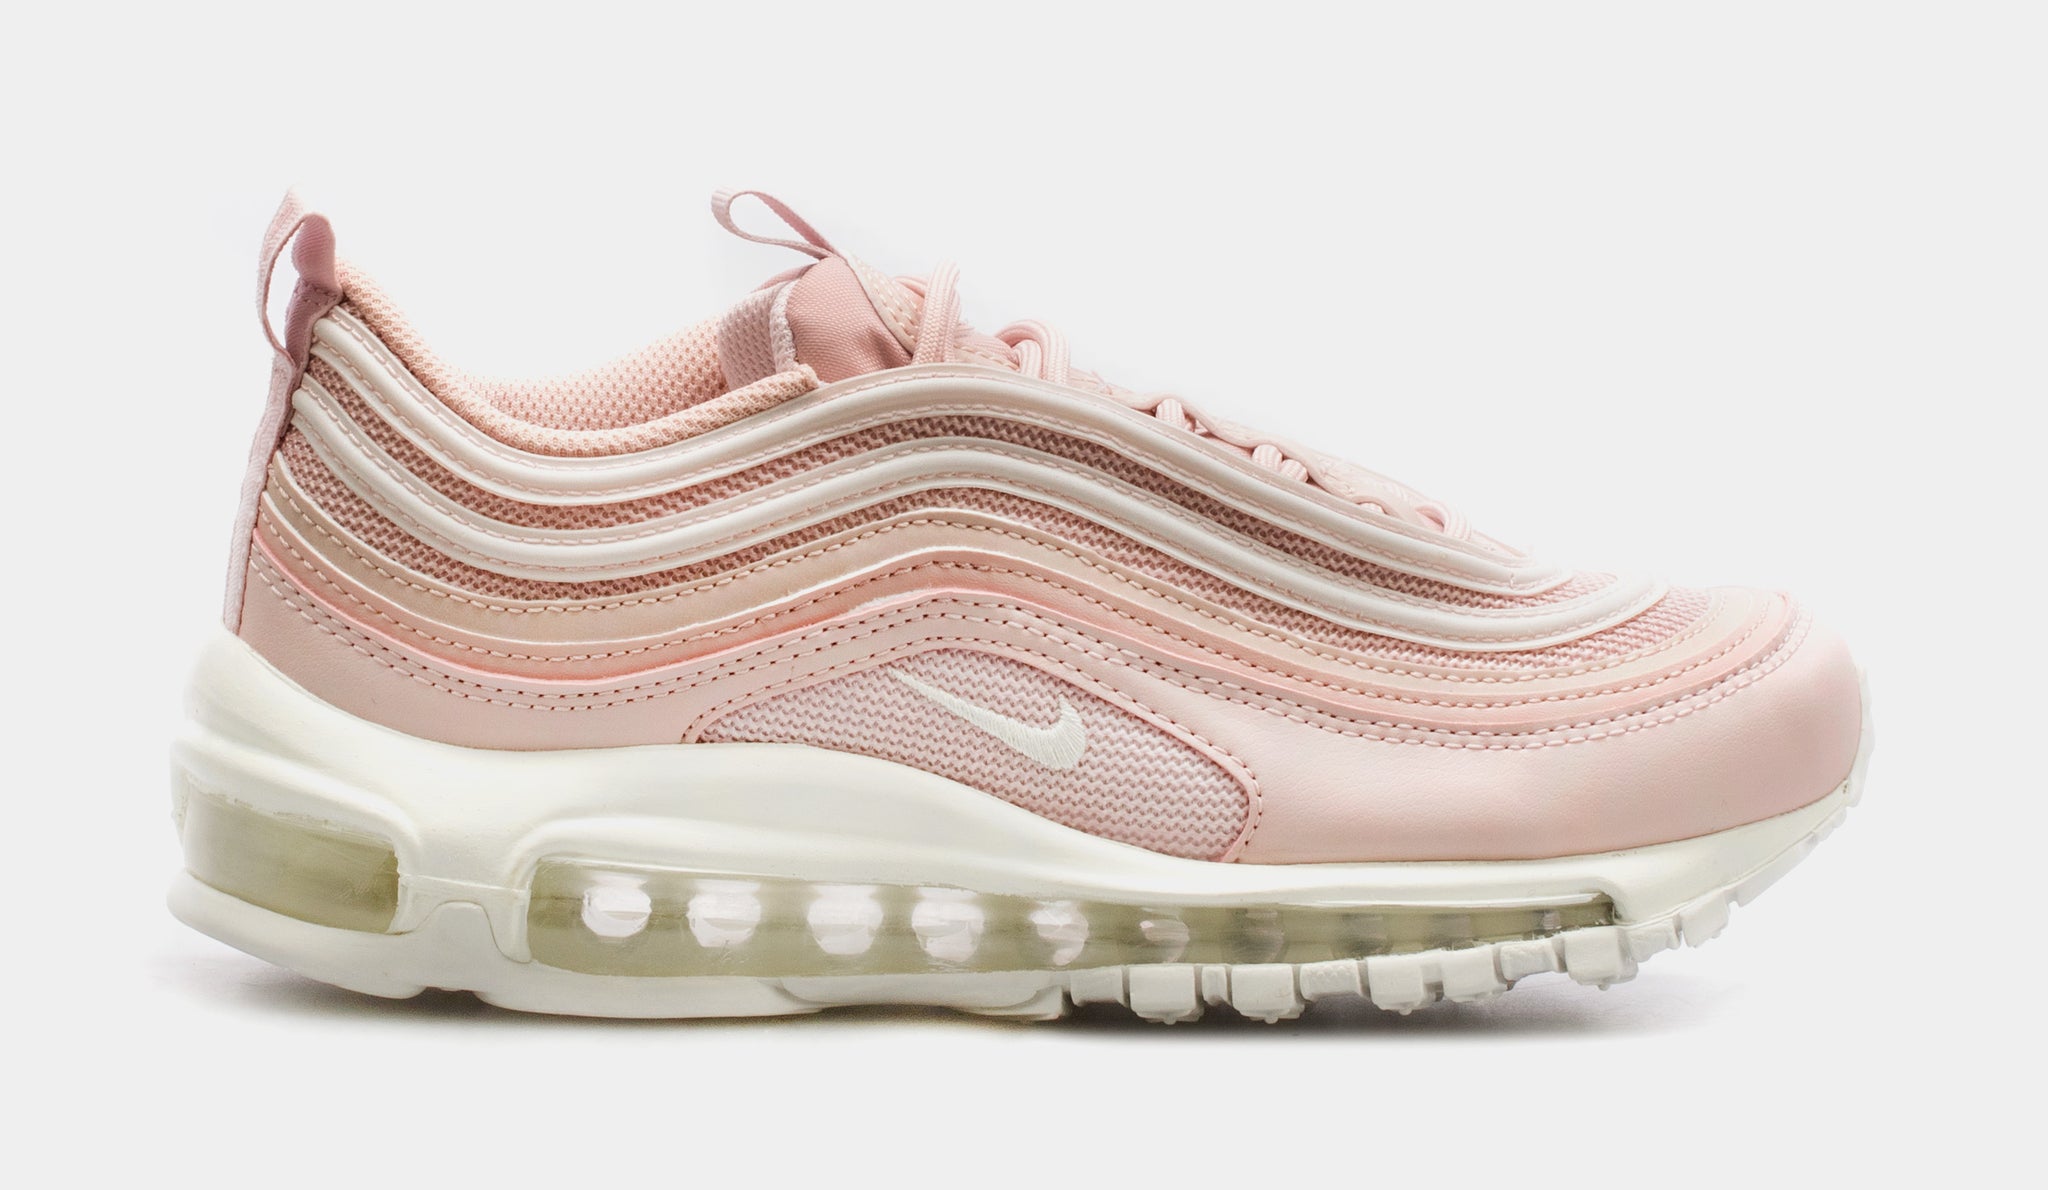 Martelaar skelet afbetalen Nike Air Max 97 Womens Lifestyle Shoes Pink DH8016-600 – Shoe Palace